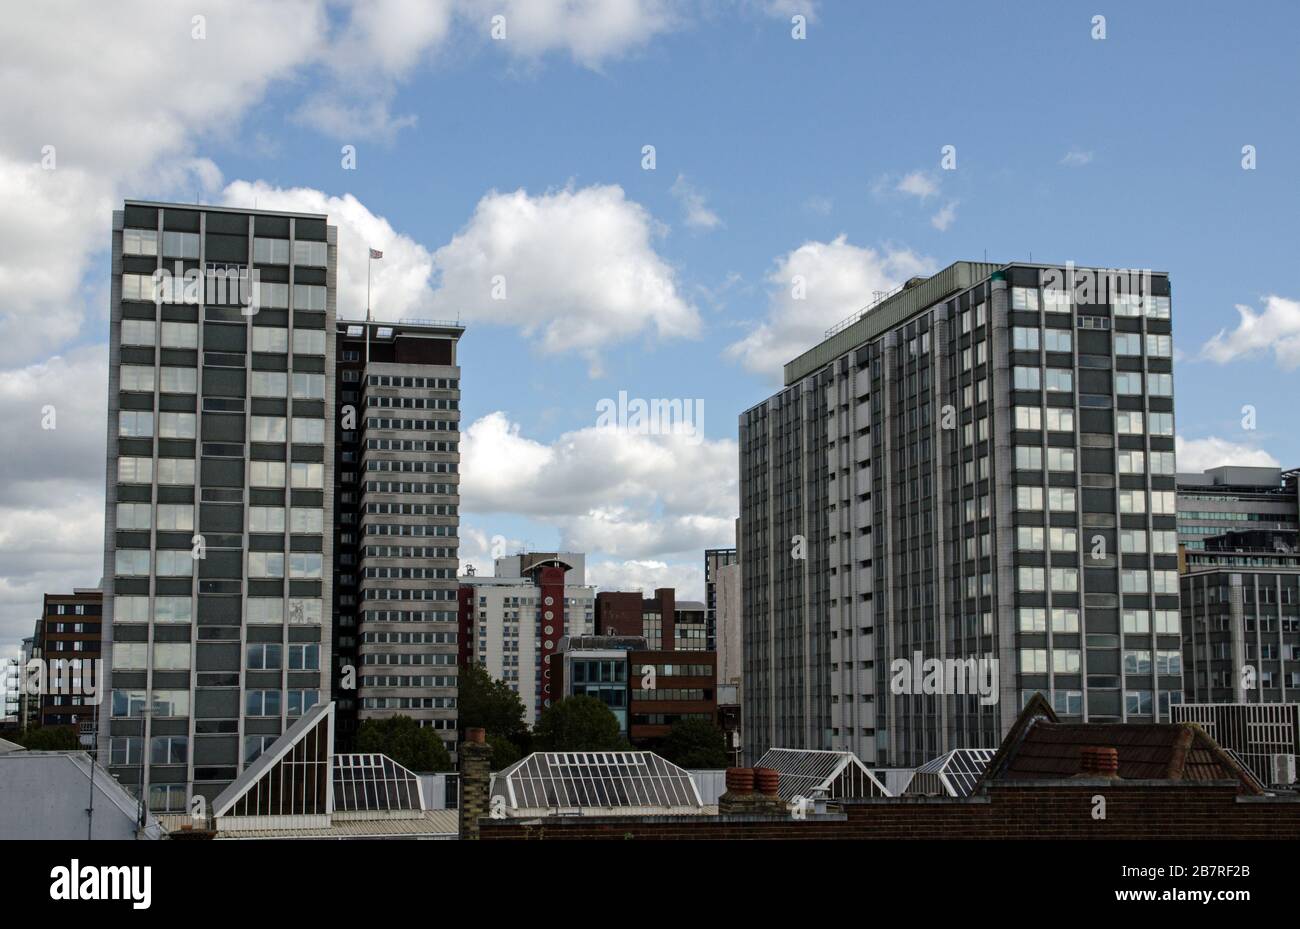 High rise buildings with offices and apartments in the middle of Croydon, South London. Stock Photo